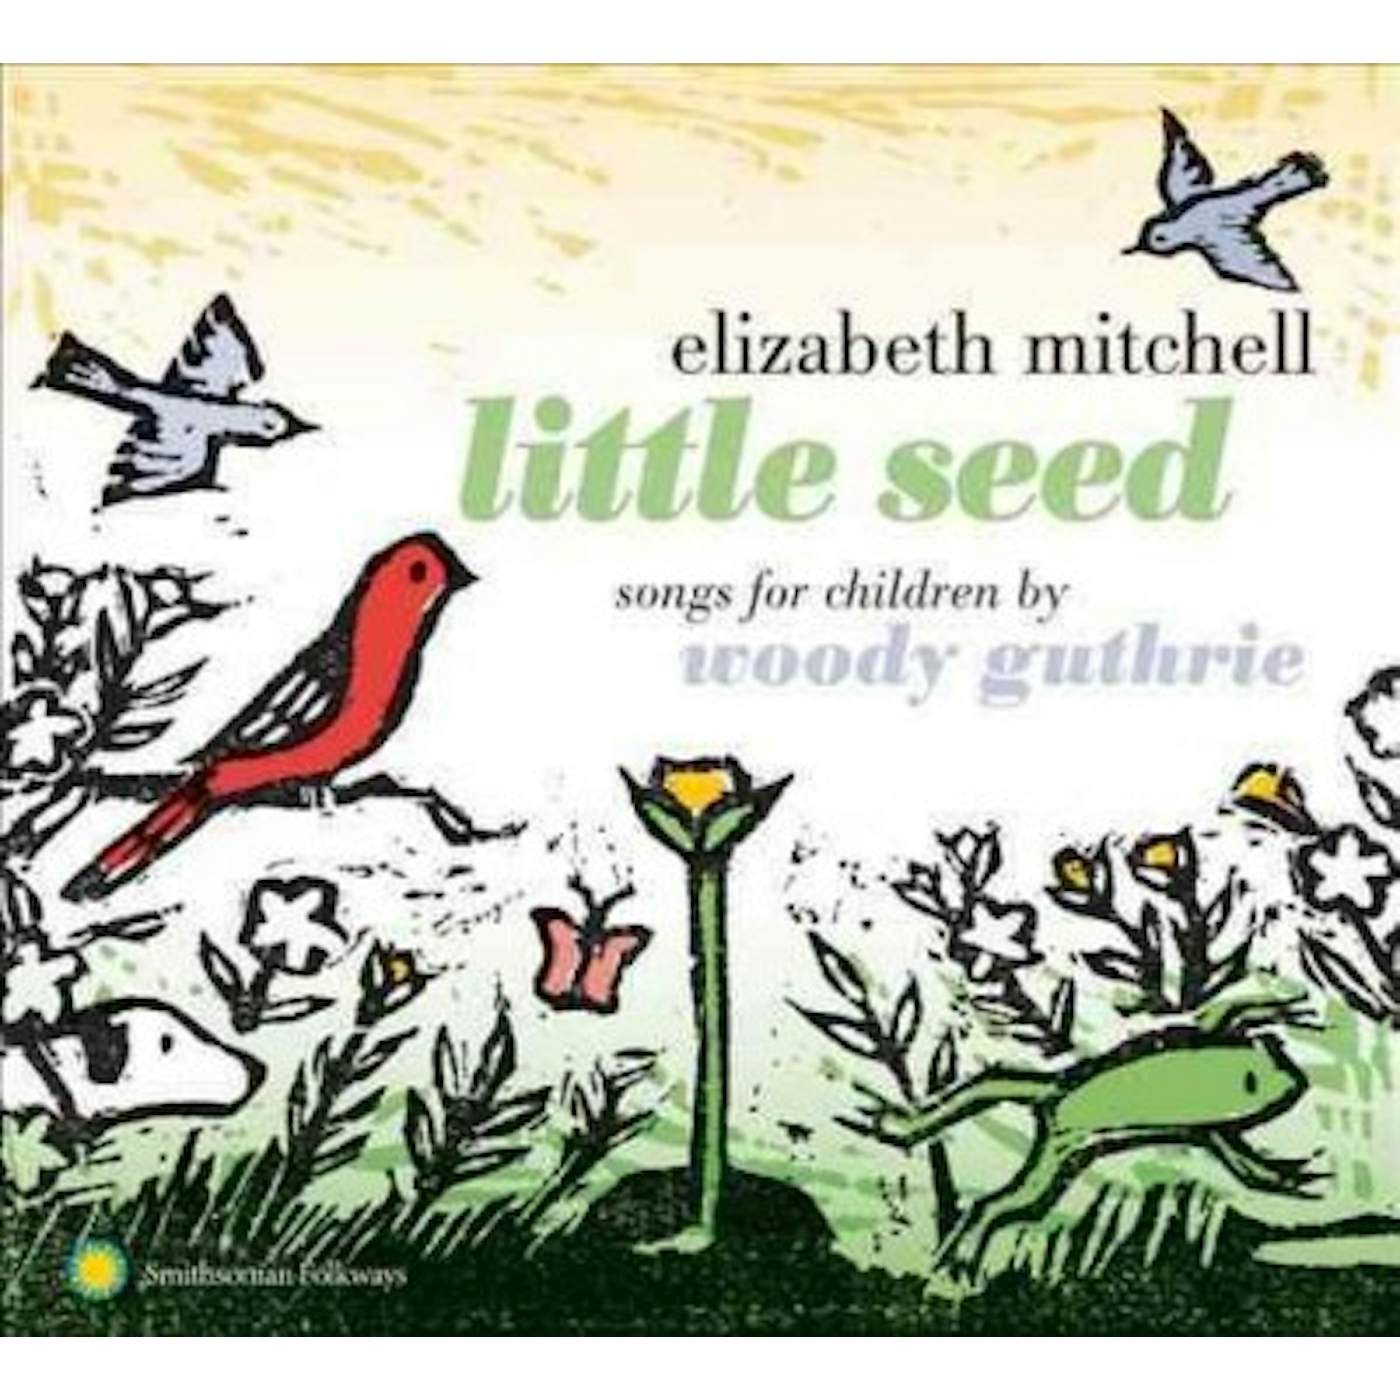 Elizabeth Mitchell Little Seed: Songs for Children by Woody Guthrie CD